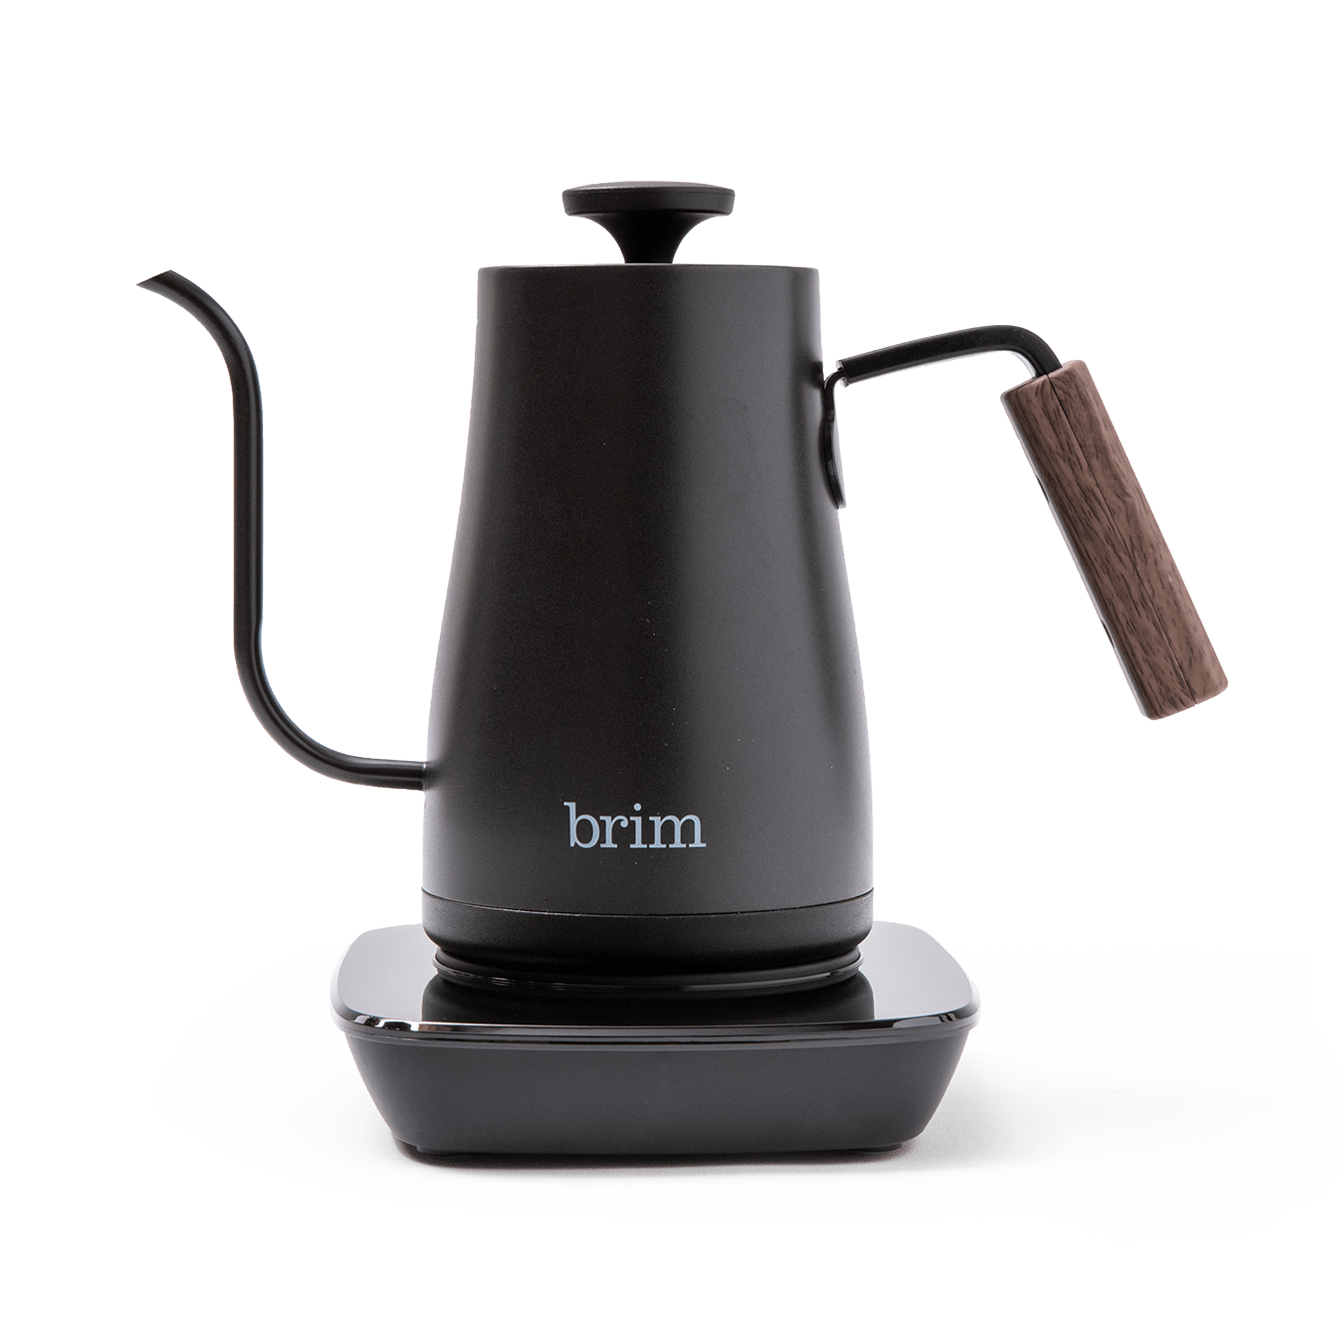 https://res.cloudinary.com/hksqkdlah/image/upload/SIL_Brim_0point8-liter-Precision-Temperature-and-Perfect-Pour-Gooseneck-Kettle_24393_g0wcfk.png